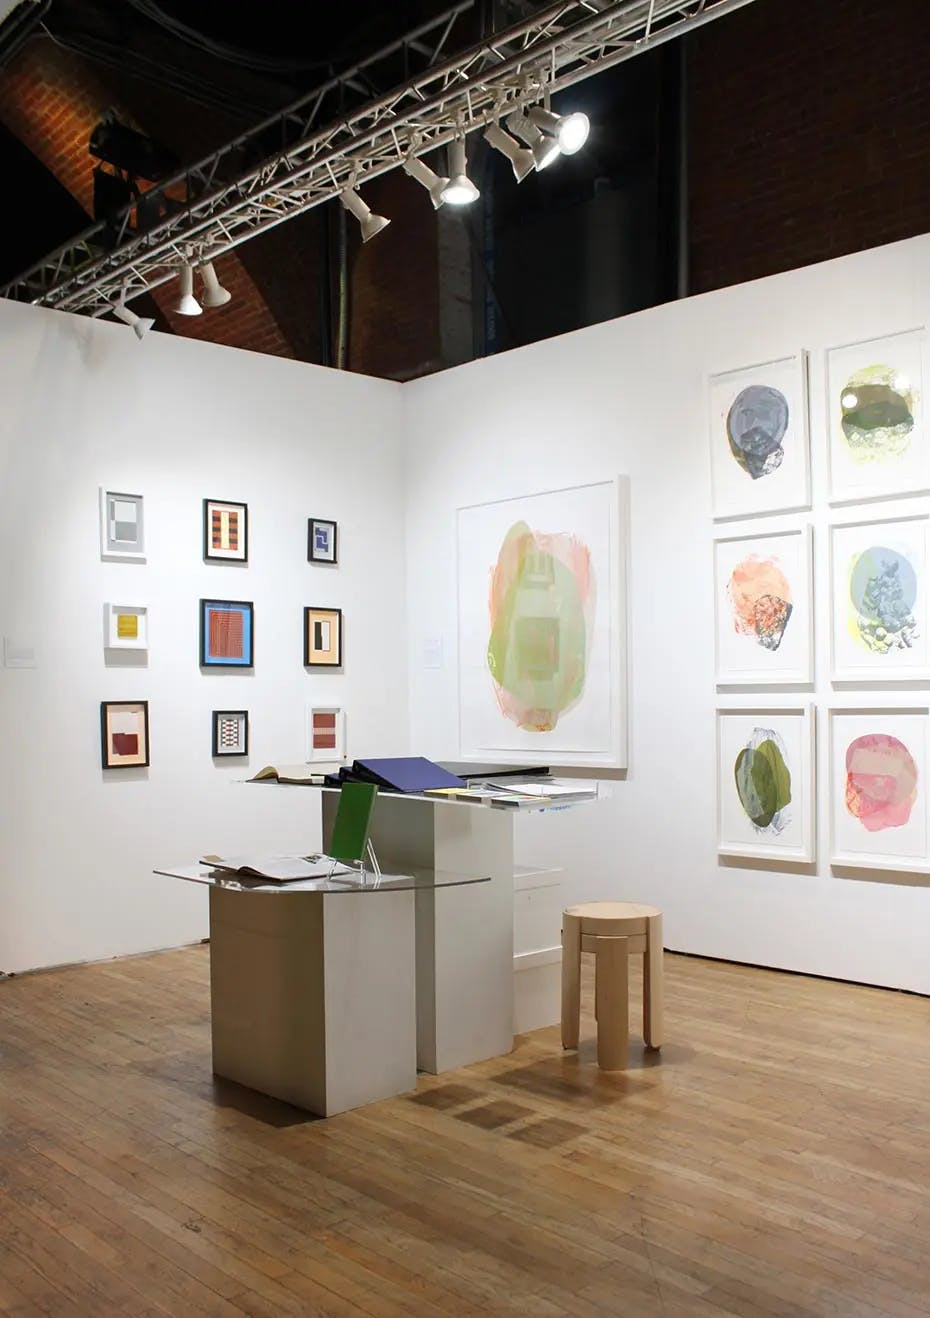 Artwork installed as part of E/AB Fair, one of Uprise Art's Art Fairs in New York, NY.